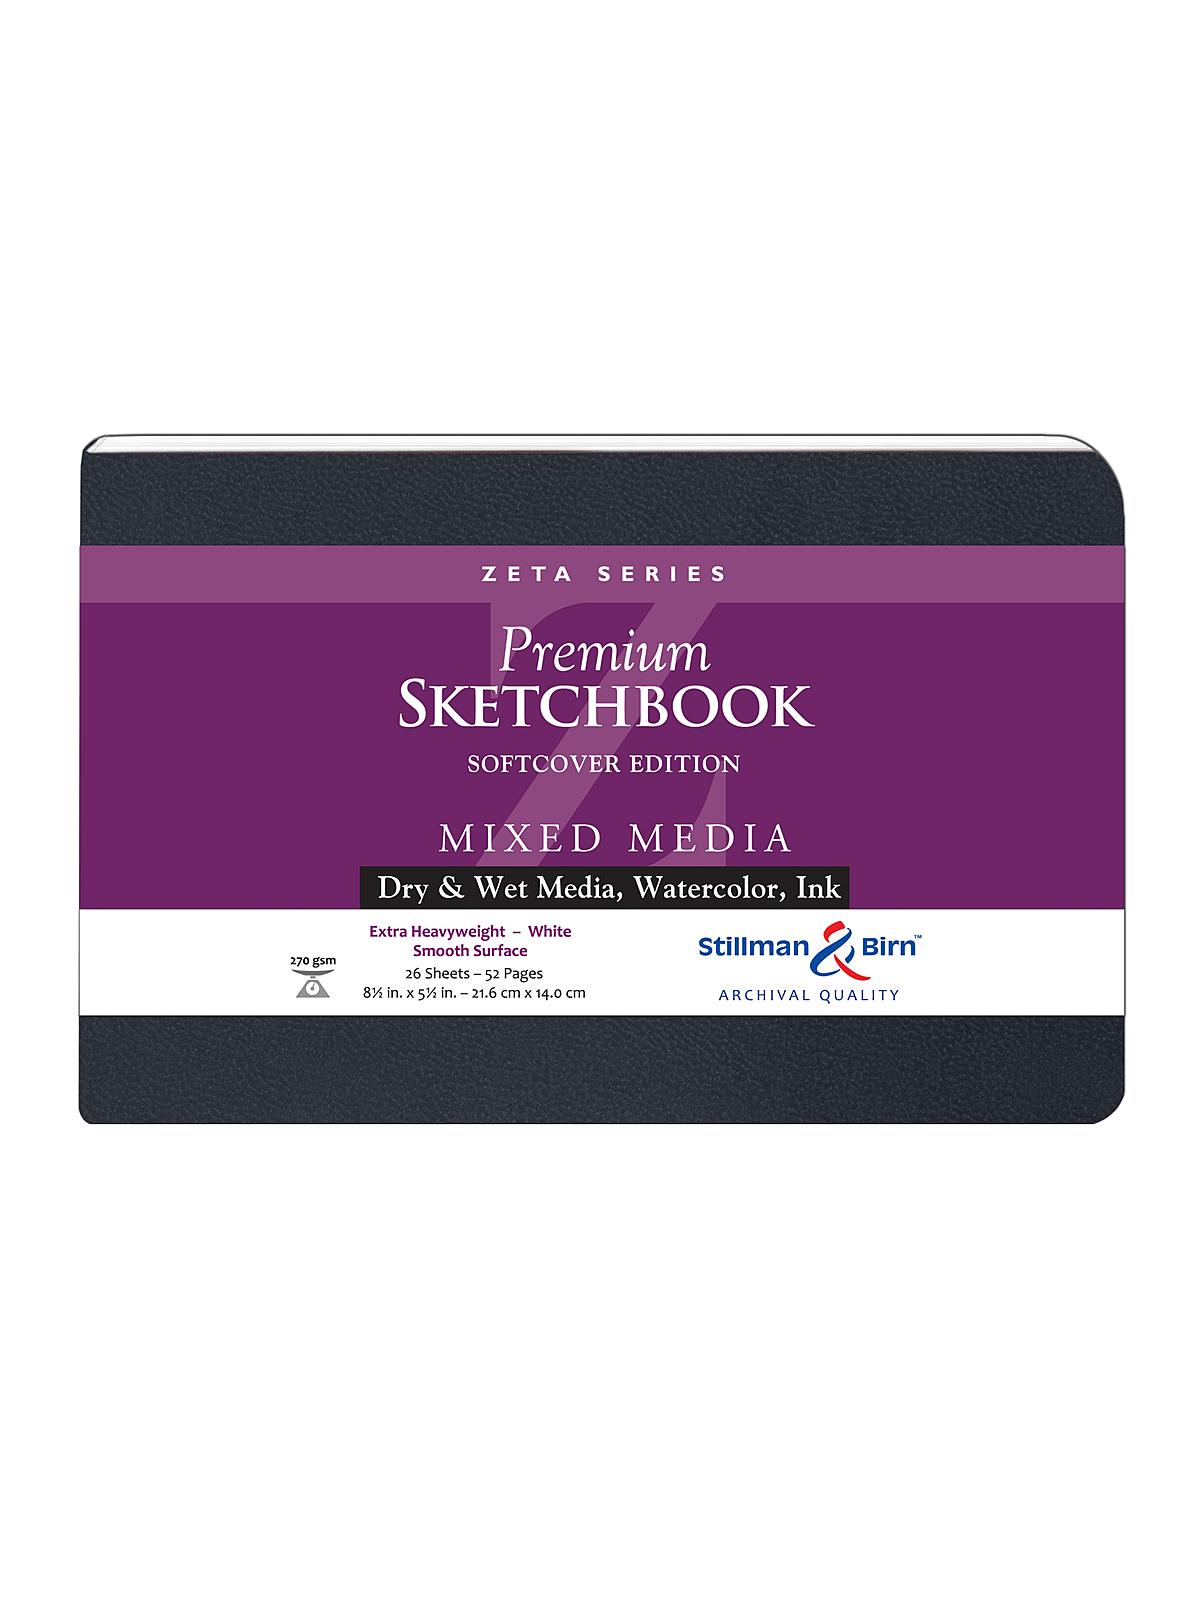 Zeta Series Softcover Sketchbook 8.5 In. X 5.5 In. Landscape 56 Pages